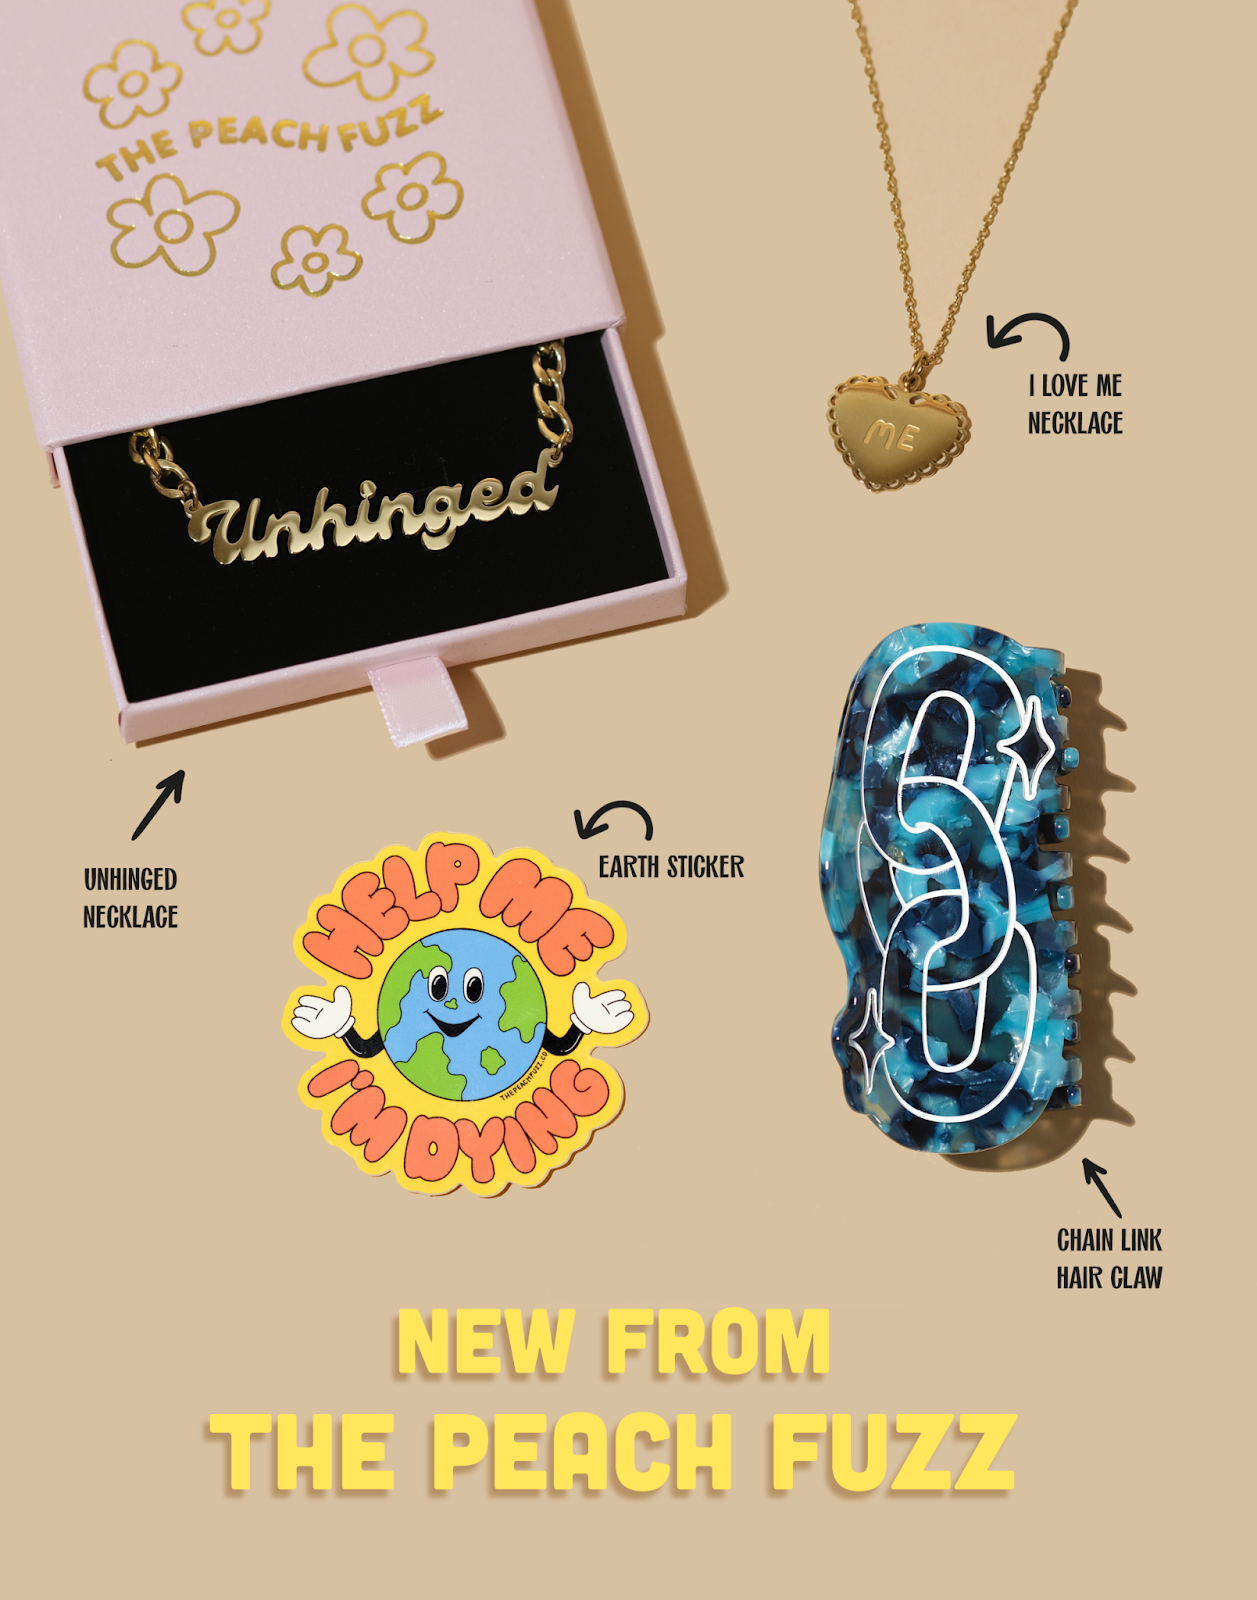 New from The Peach Fuzz at Sleepy Mountain! Unhinged necklace, I heart me necklace, Chain link hair claw, help me, I'm dying sticker